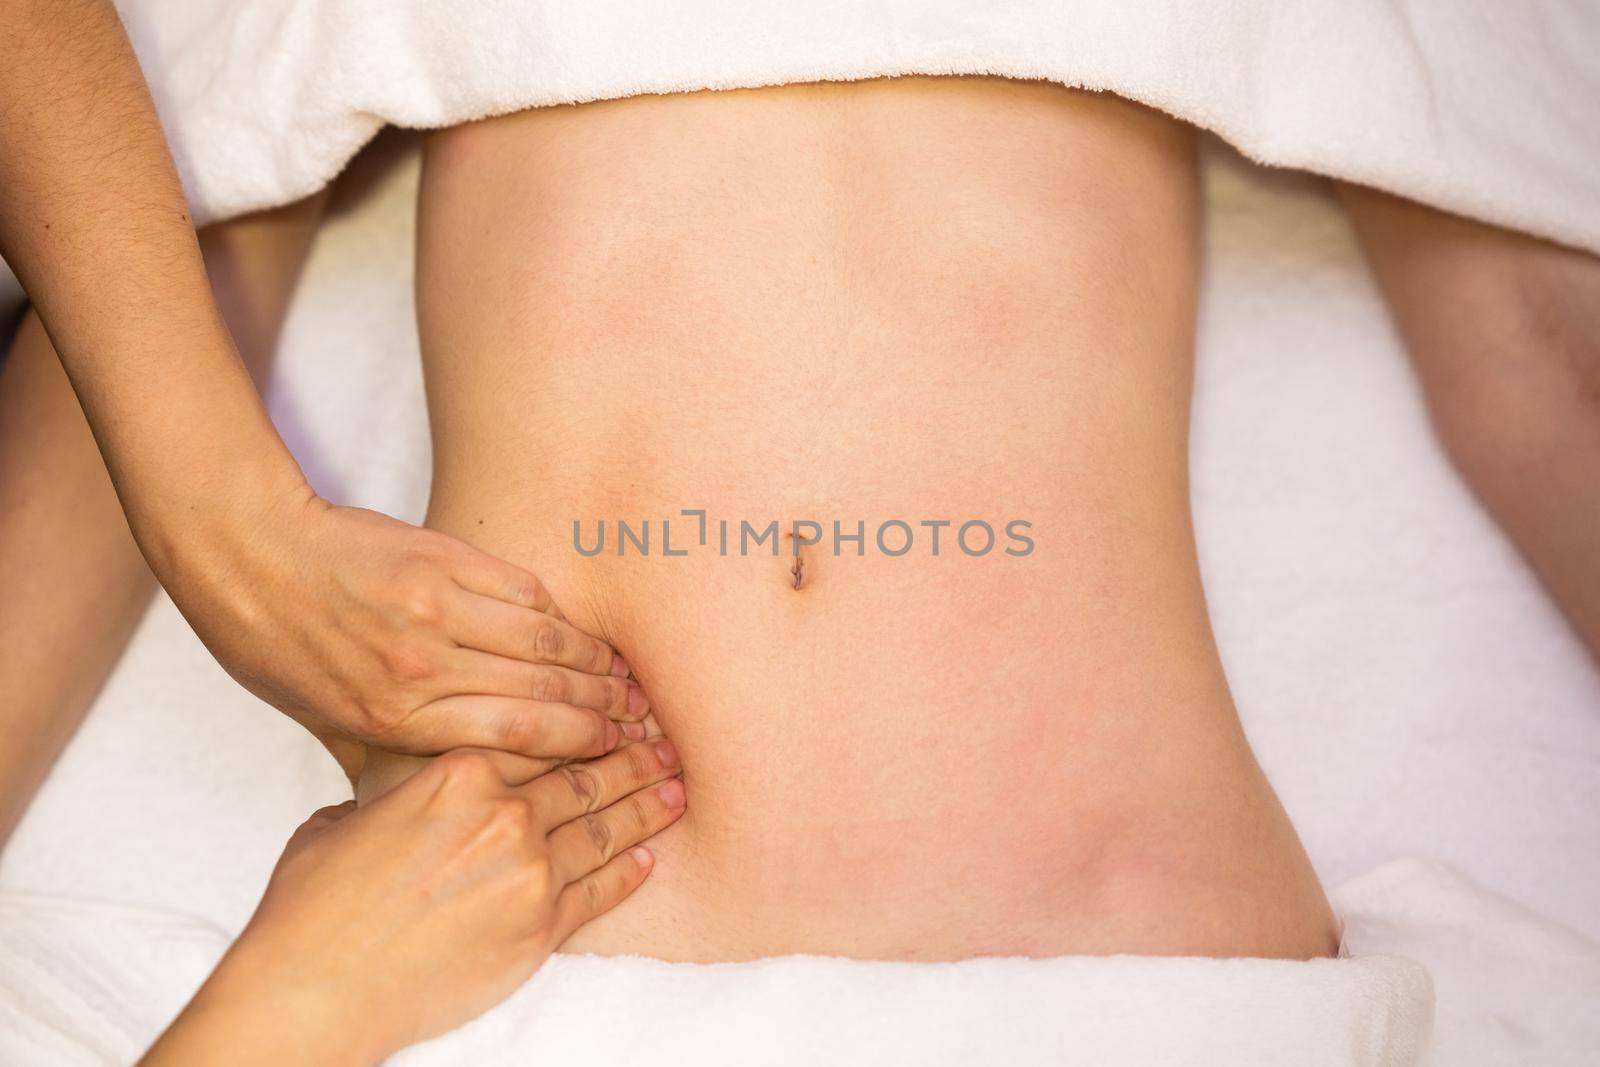 Top view of hands massaging female abdomen in a physiotherapy center. Therapist applying pressure on belly